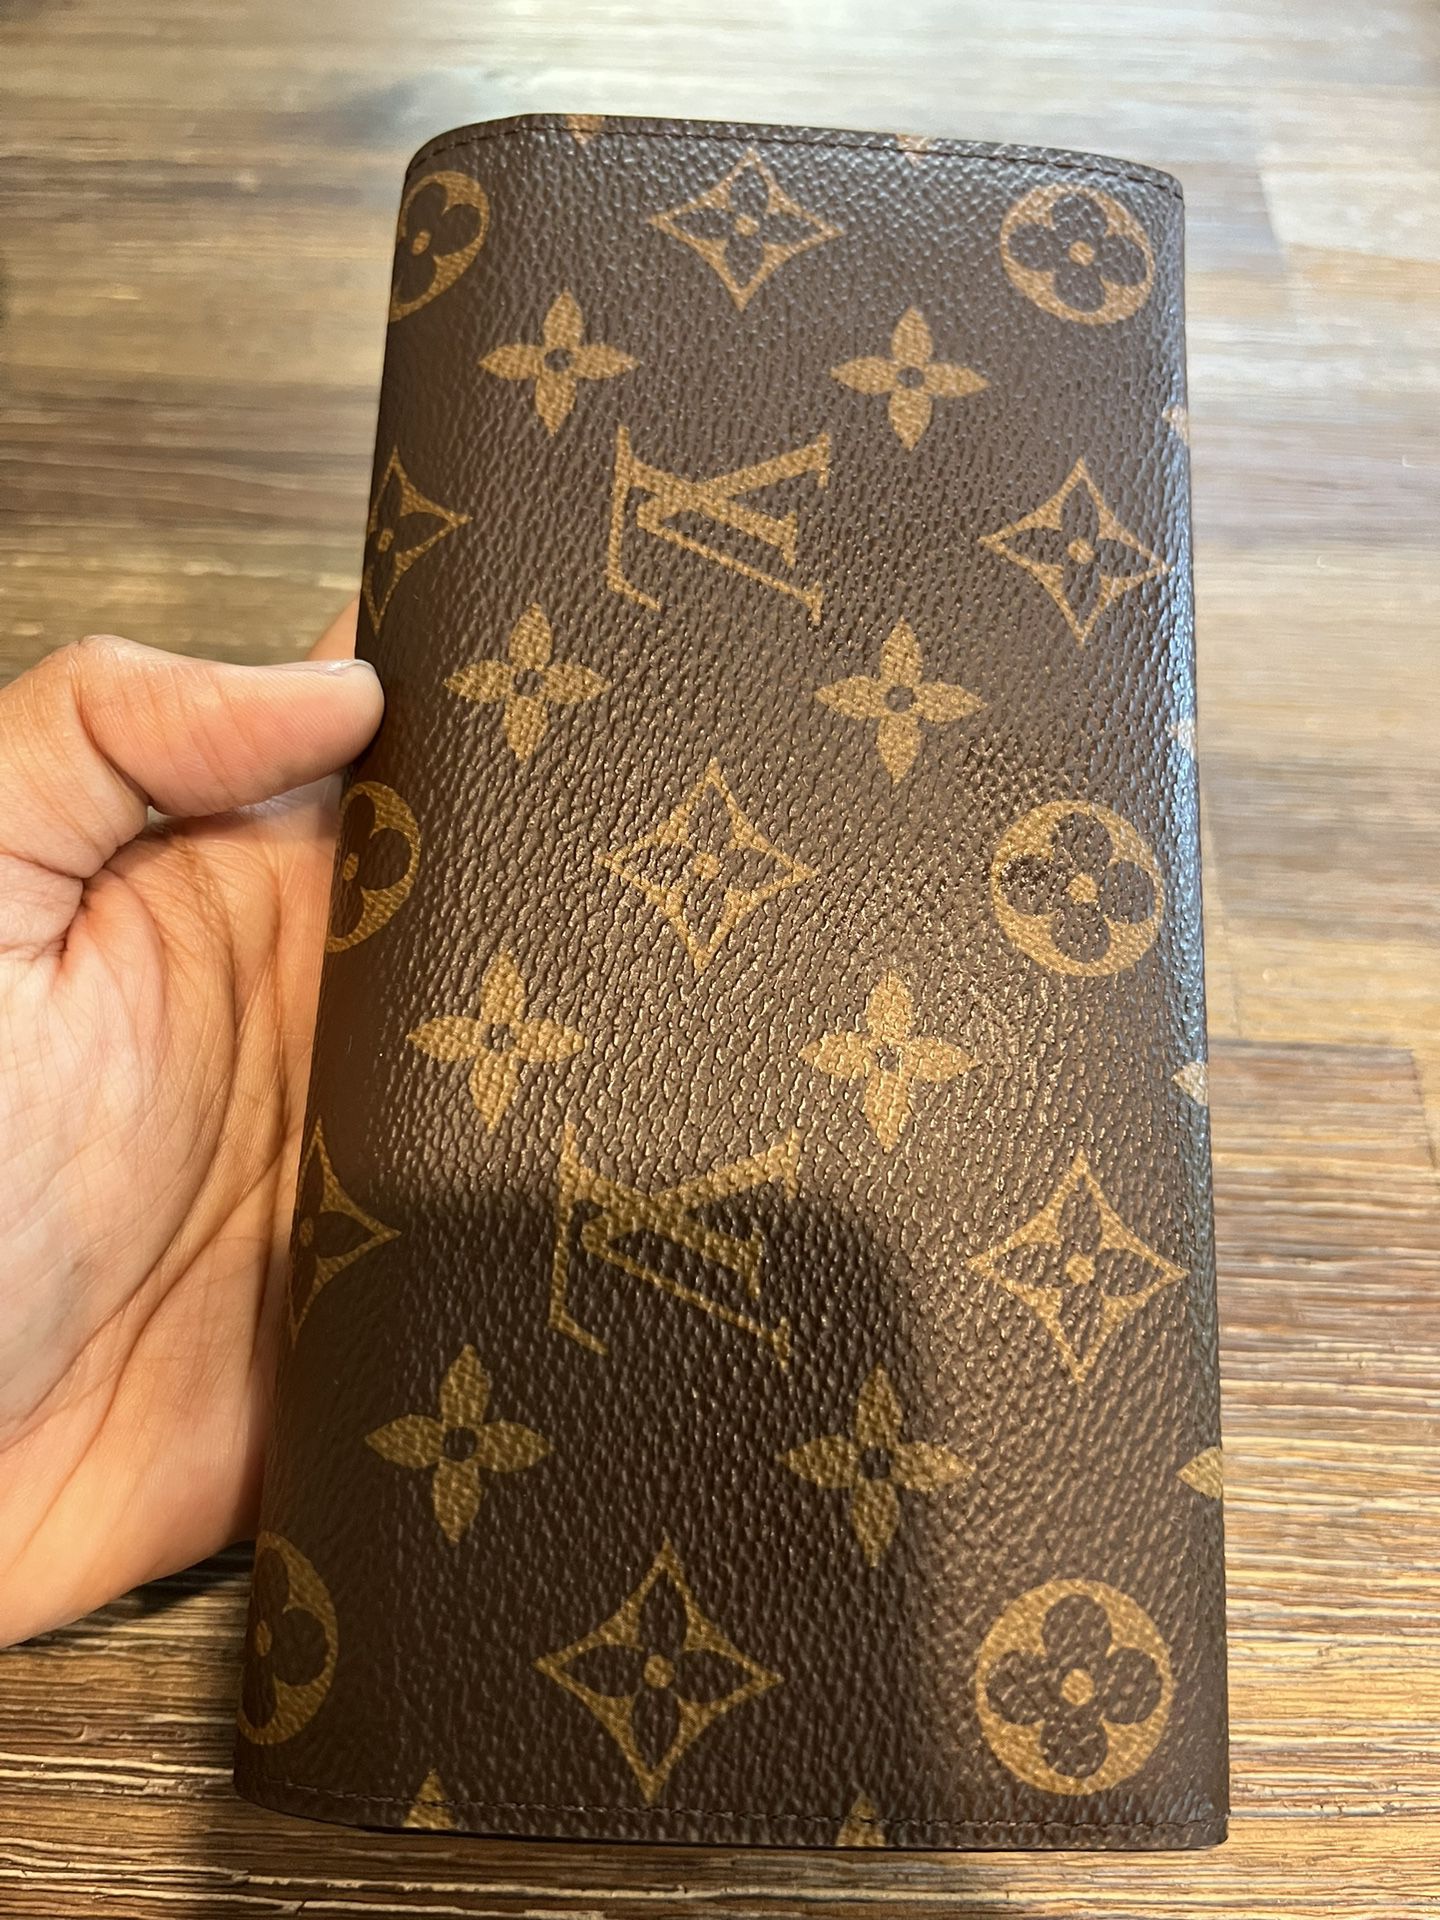 Louis Vuitton Emilie Wallet. AS IS – Chic To Chic Consignment